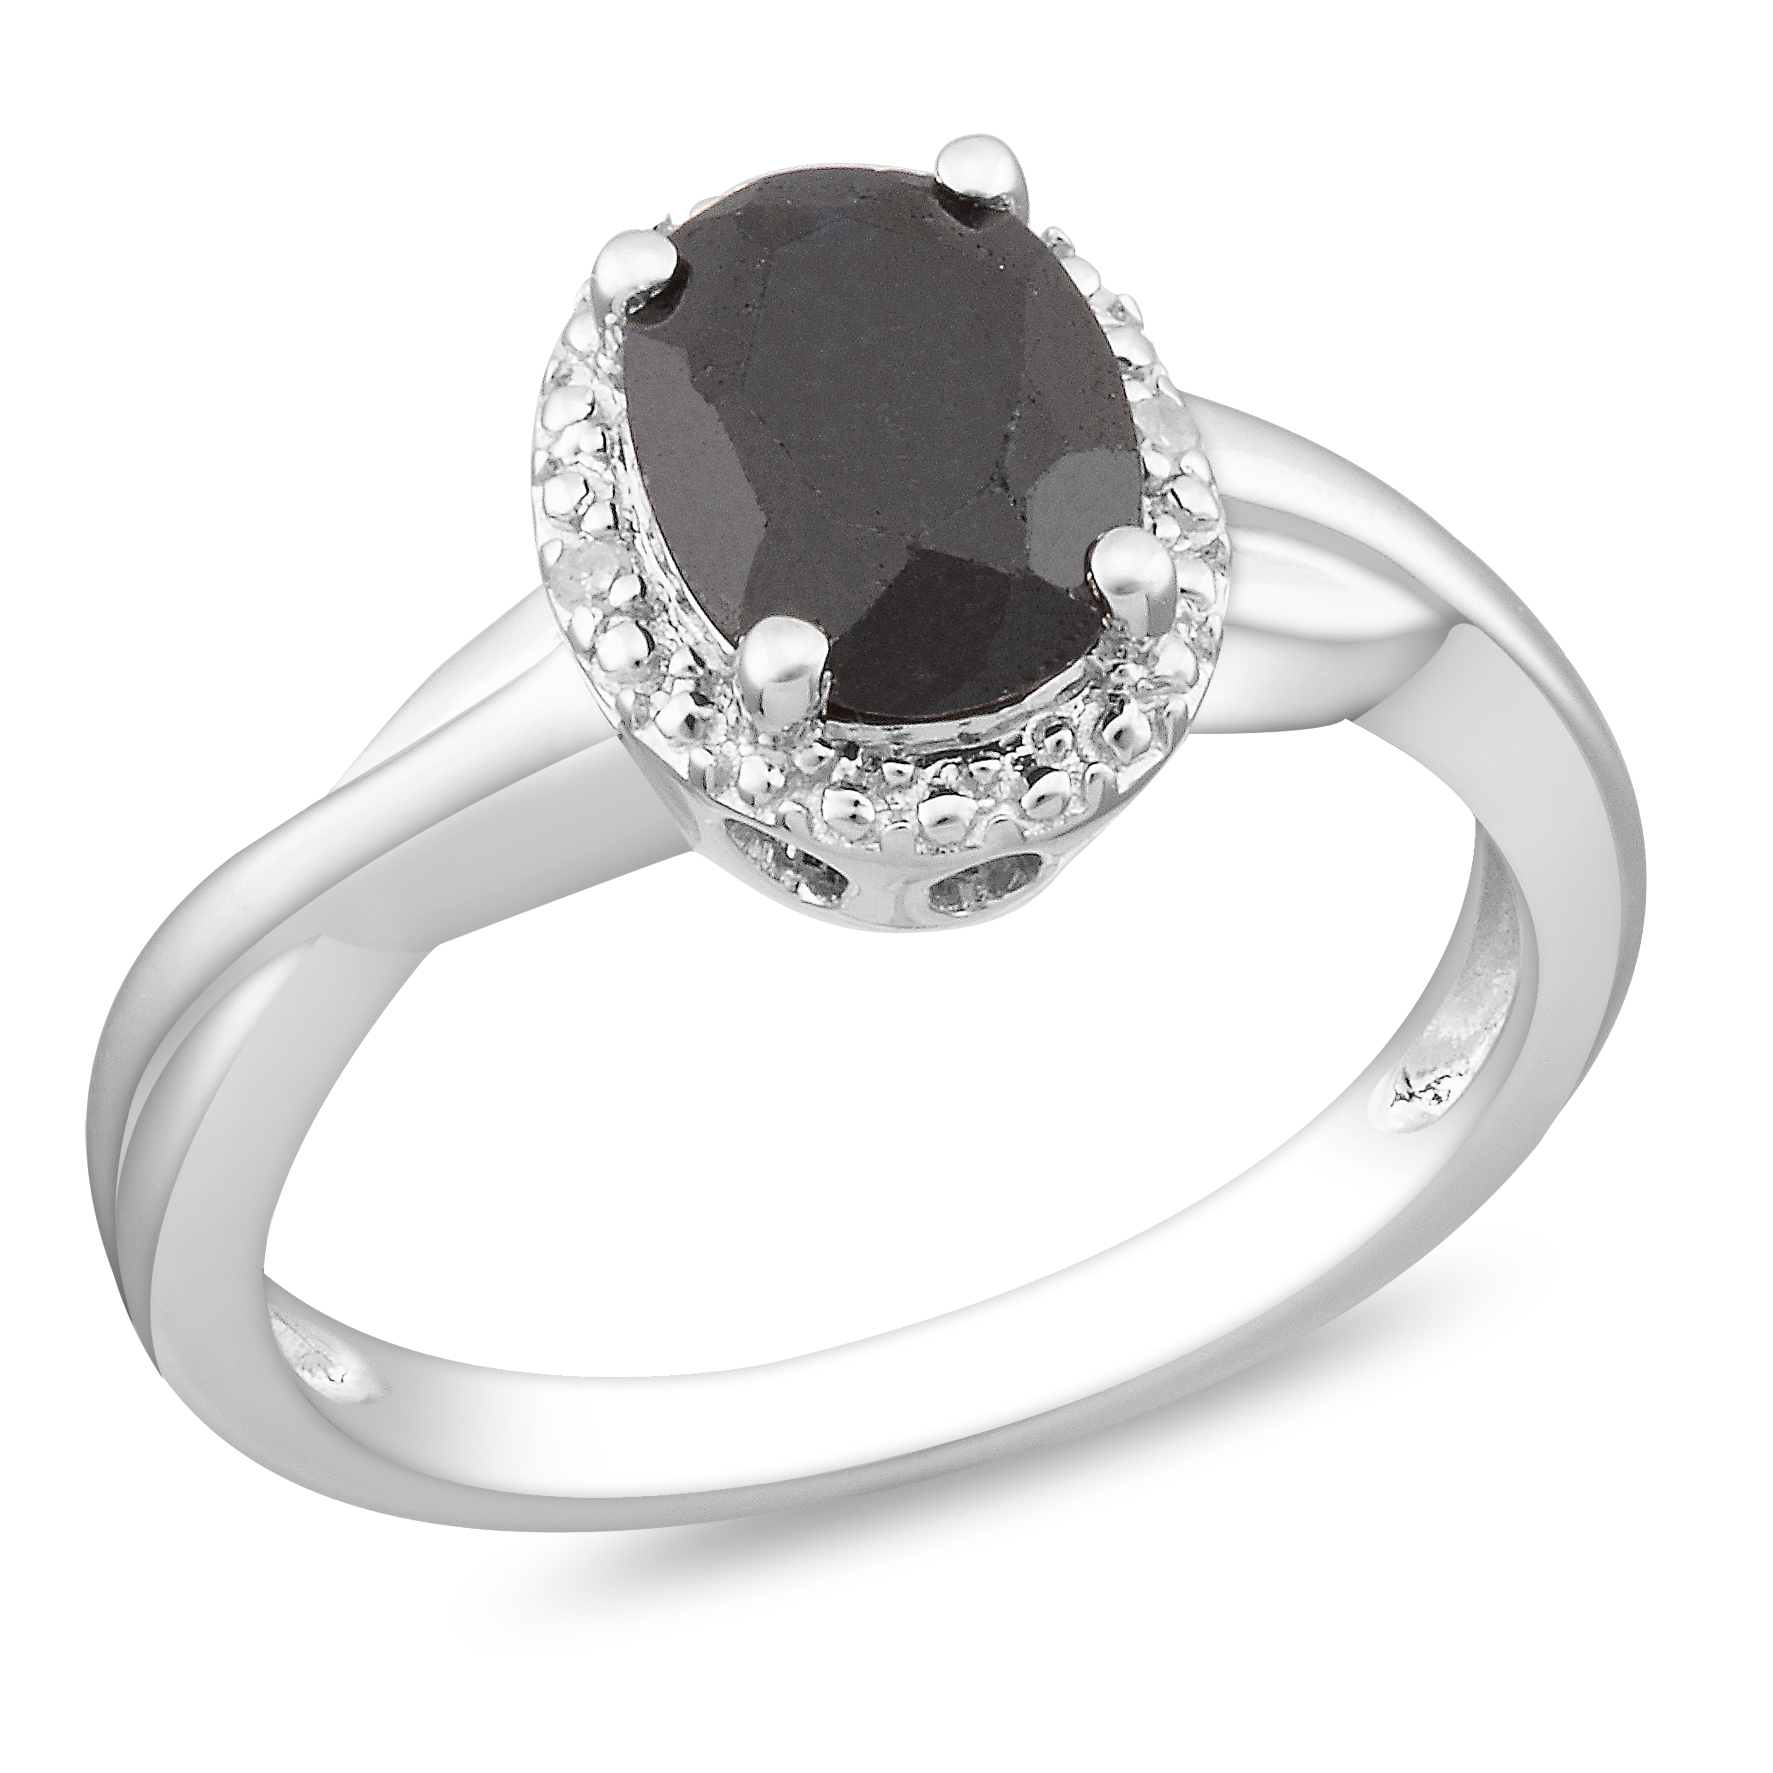 Amour 0.01 Carat T.W. Diamond and 1 3/5 Carat T.G.W. Black Sapphire Fashion Ring in Sterling Silver I3